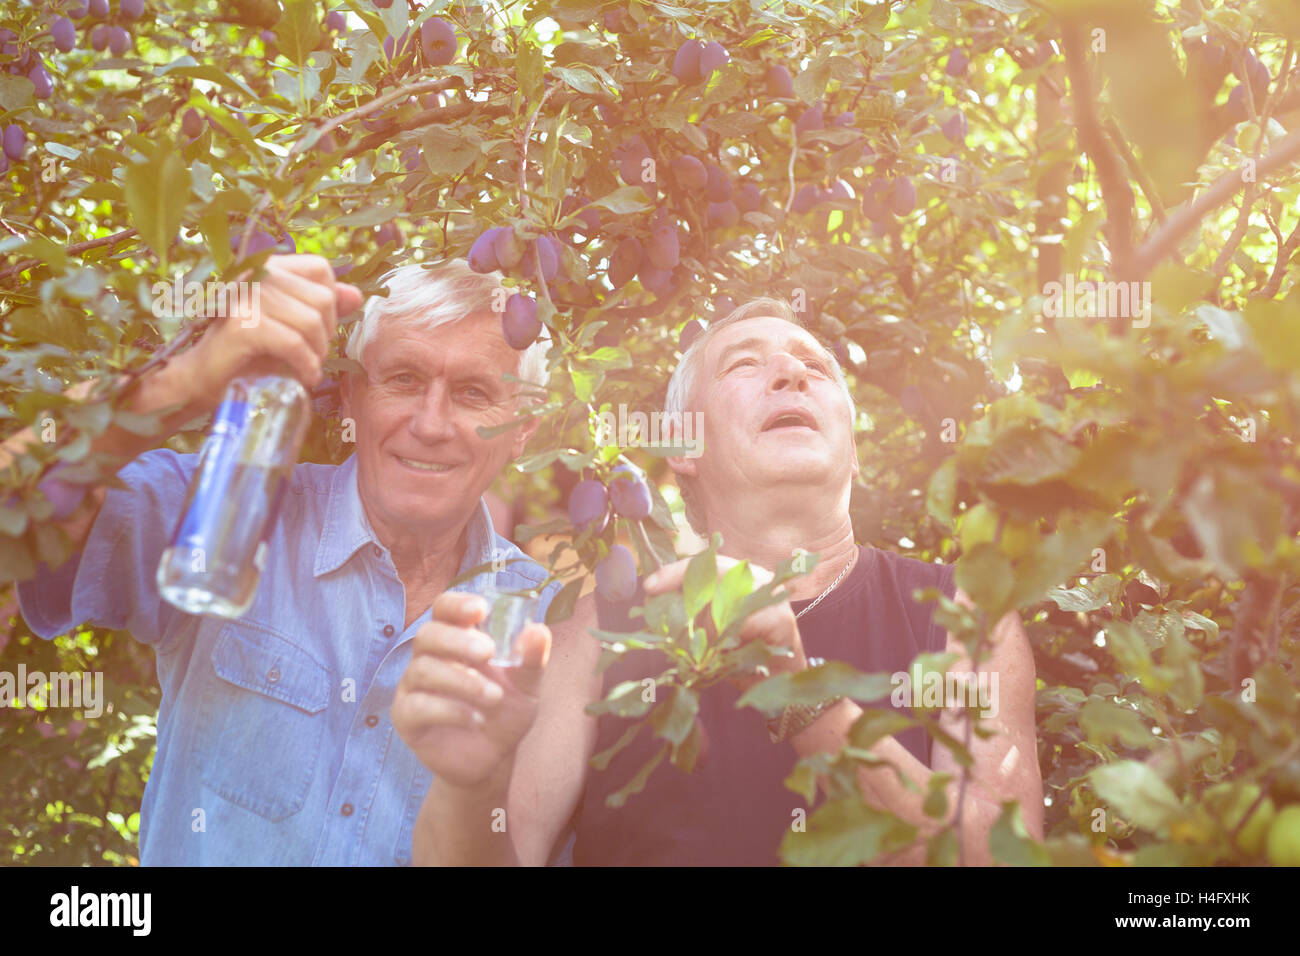 Two excited seniors with bottle of alcohol enjoying sunny day outdoors under the plum tree. Stock Photo